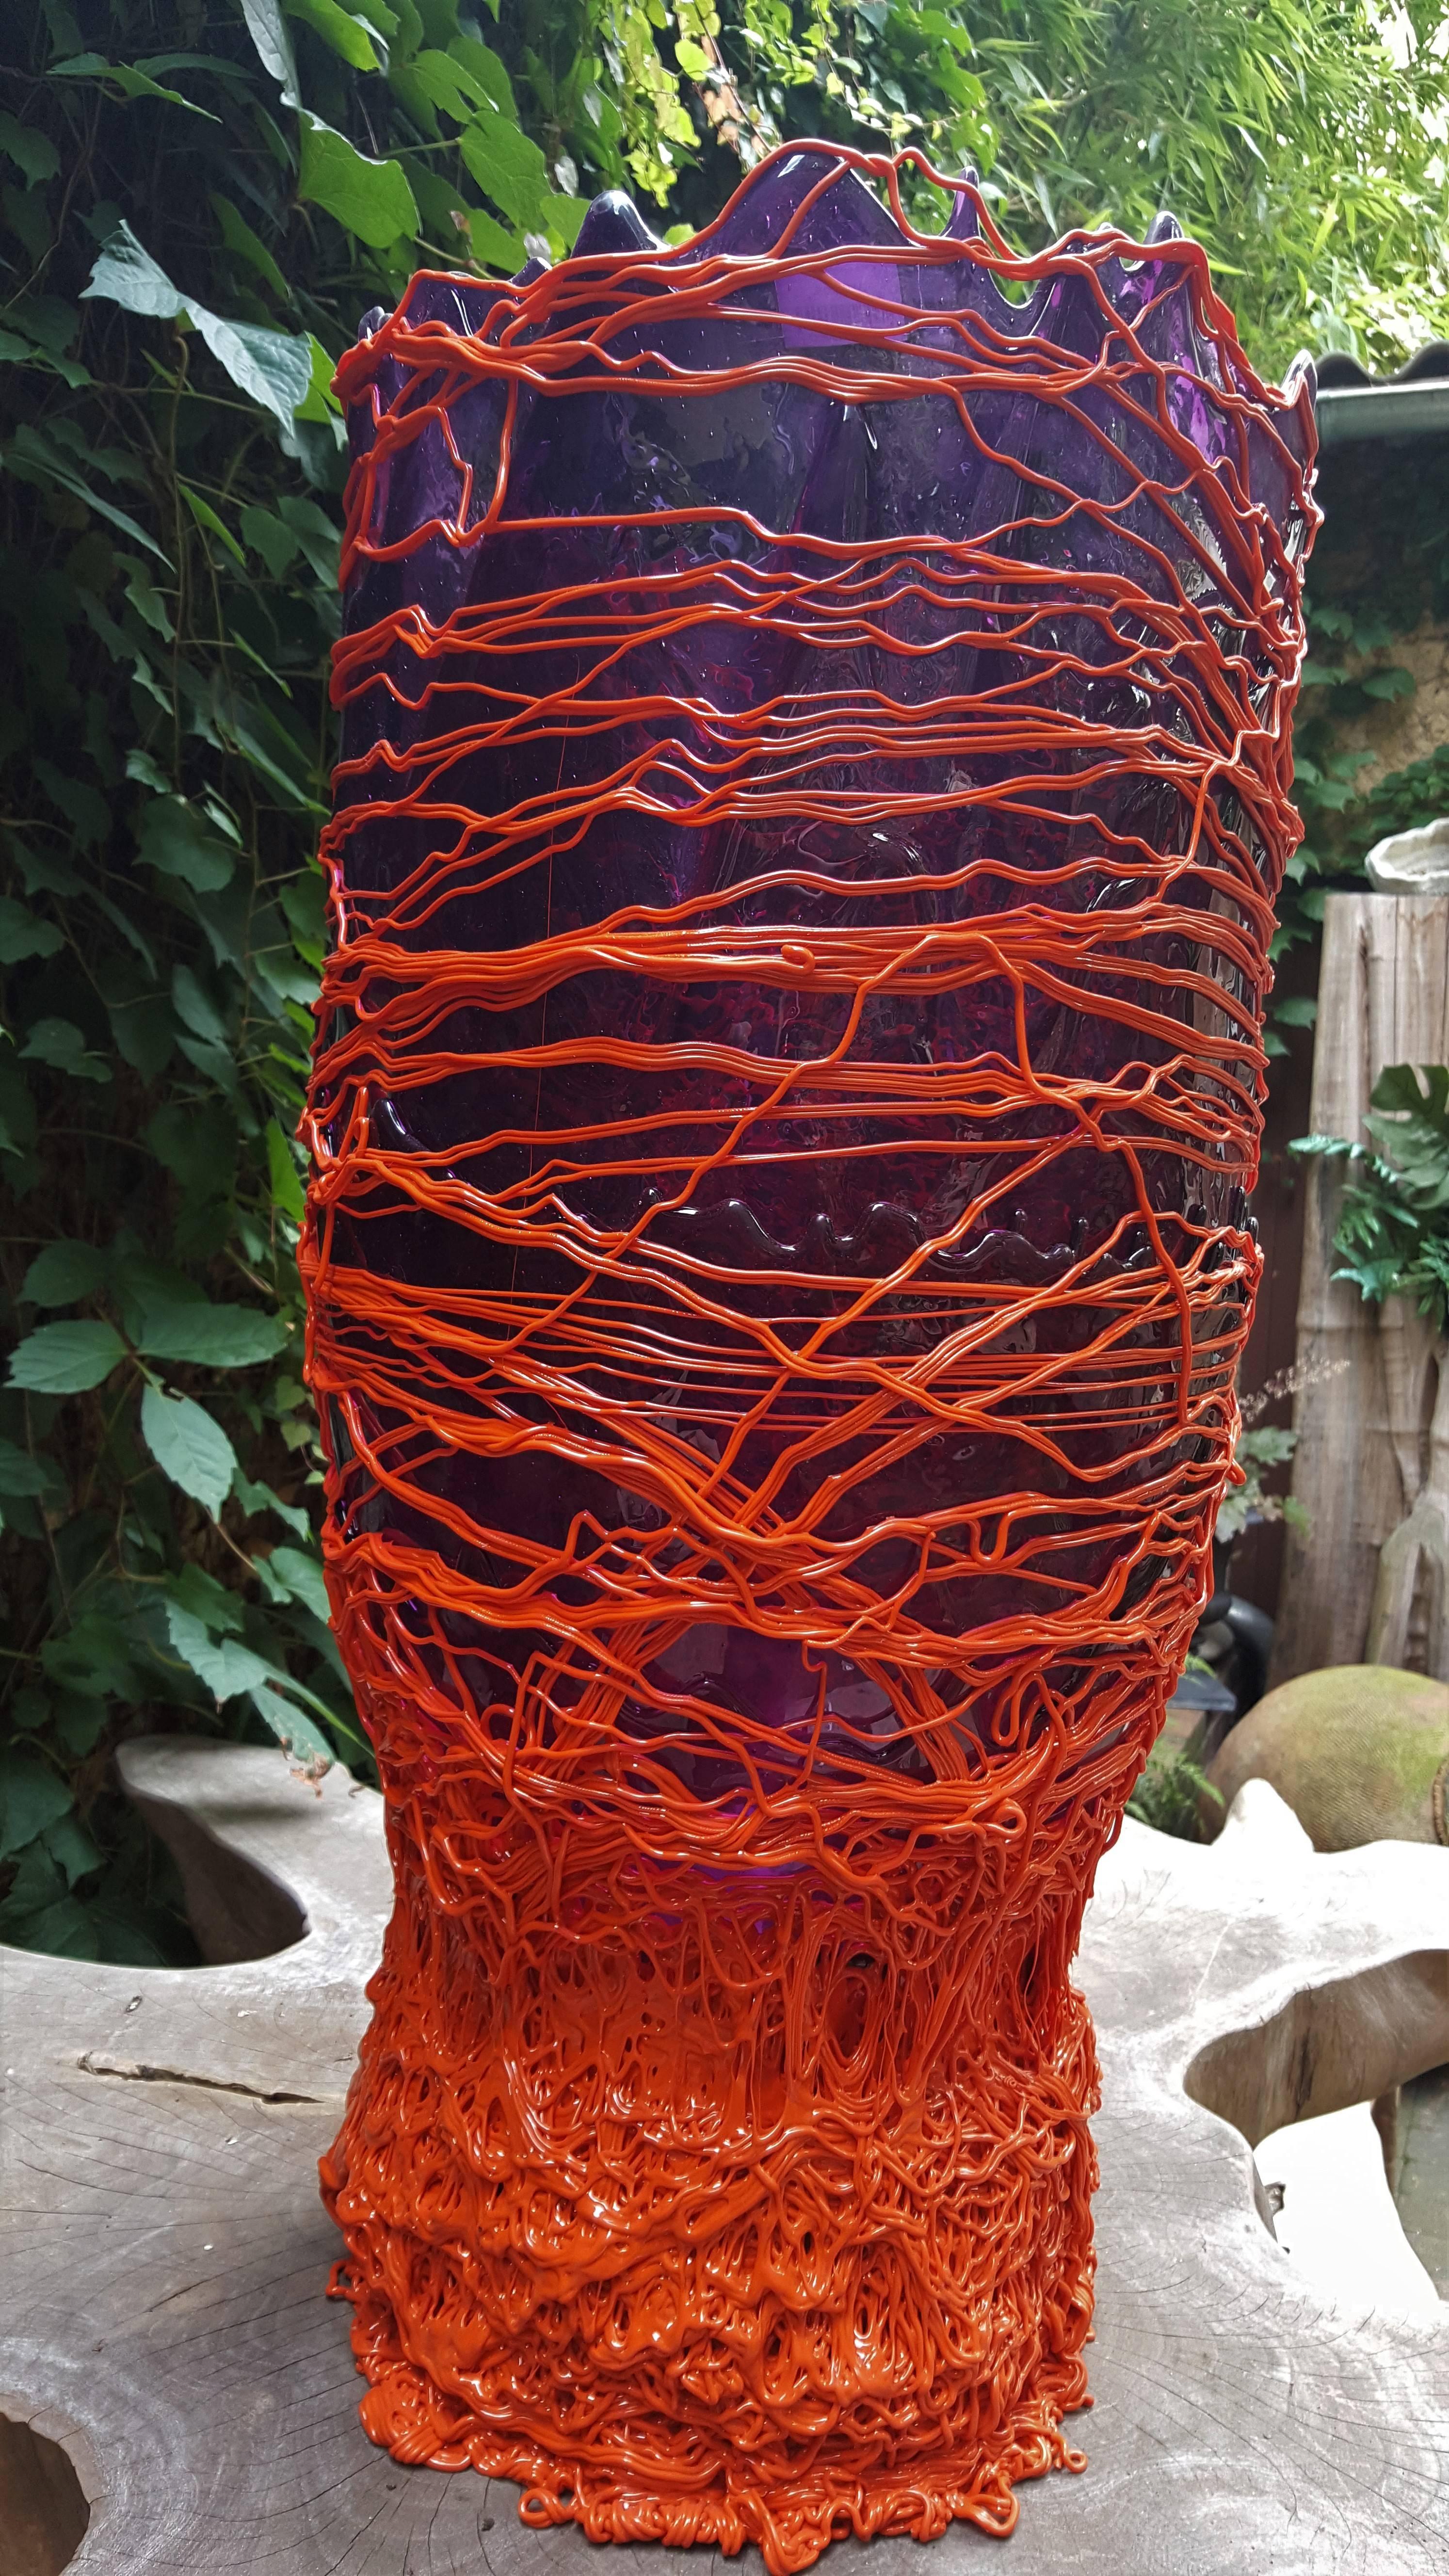 Flexible resin vase. Unique and original piece by Gaetano Pesce.
Sold with it's 